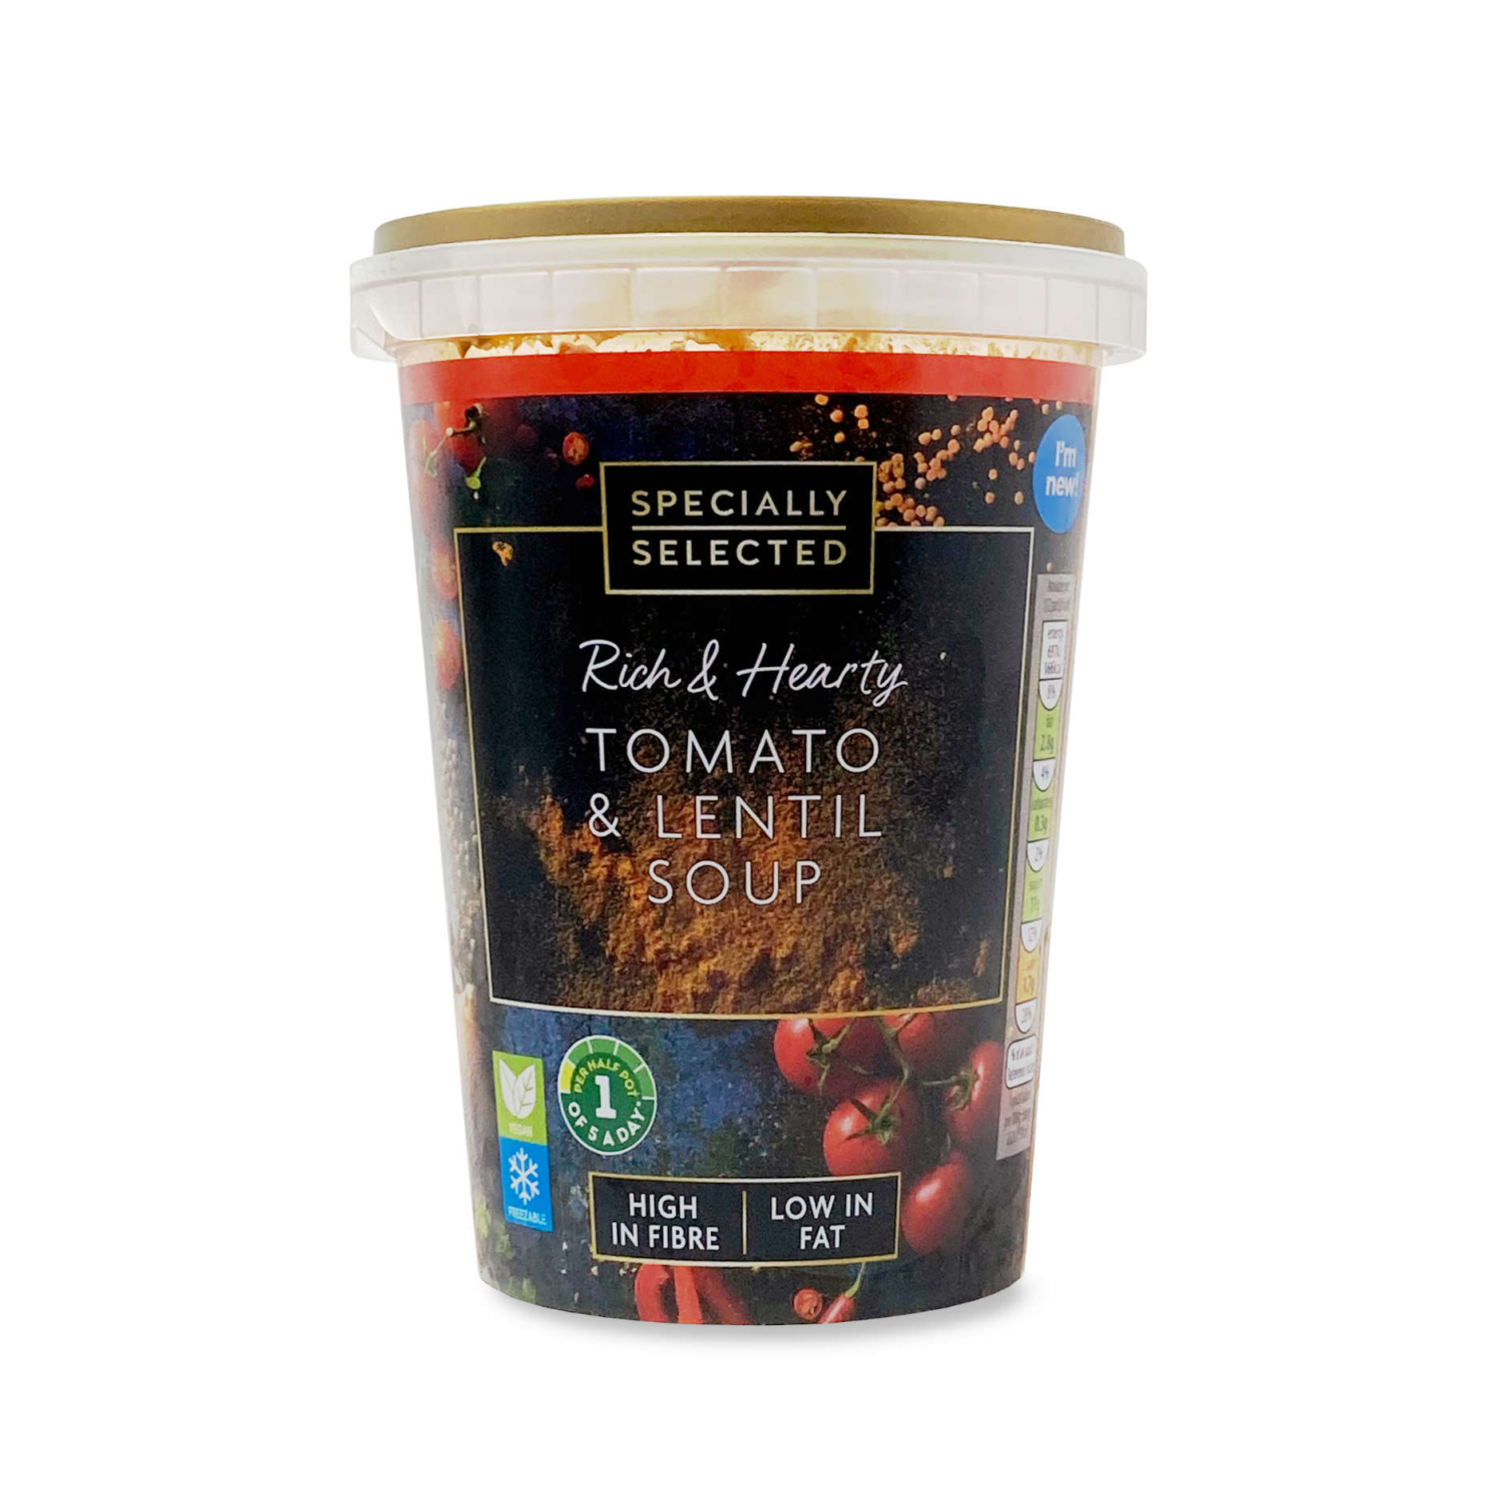 Specially Selected Rich & Hearty Tomato & Lentil Soup 600g | ALDI